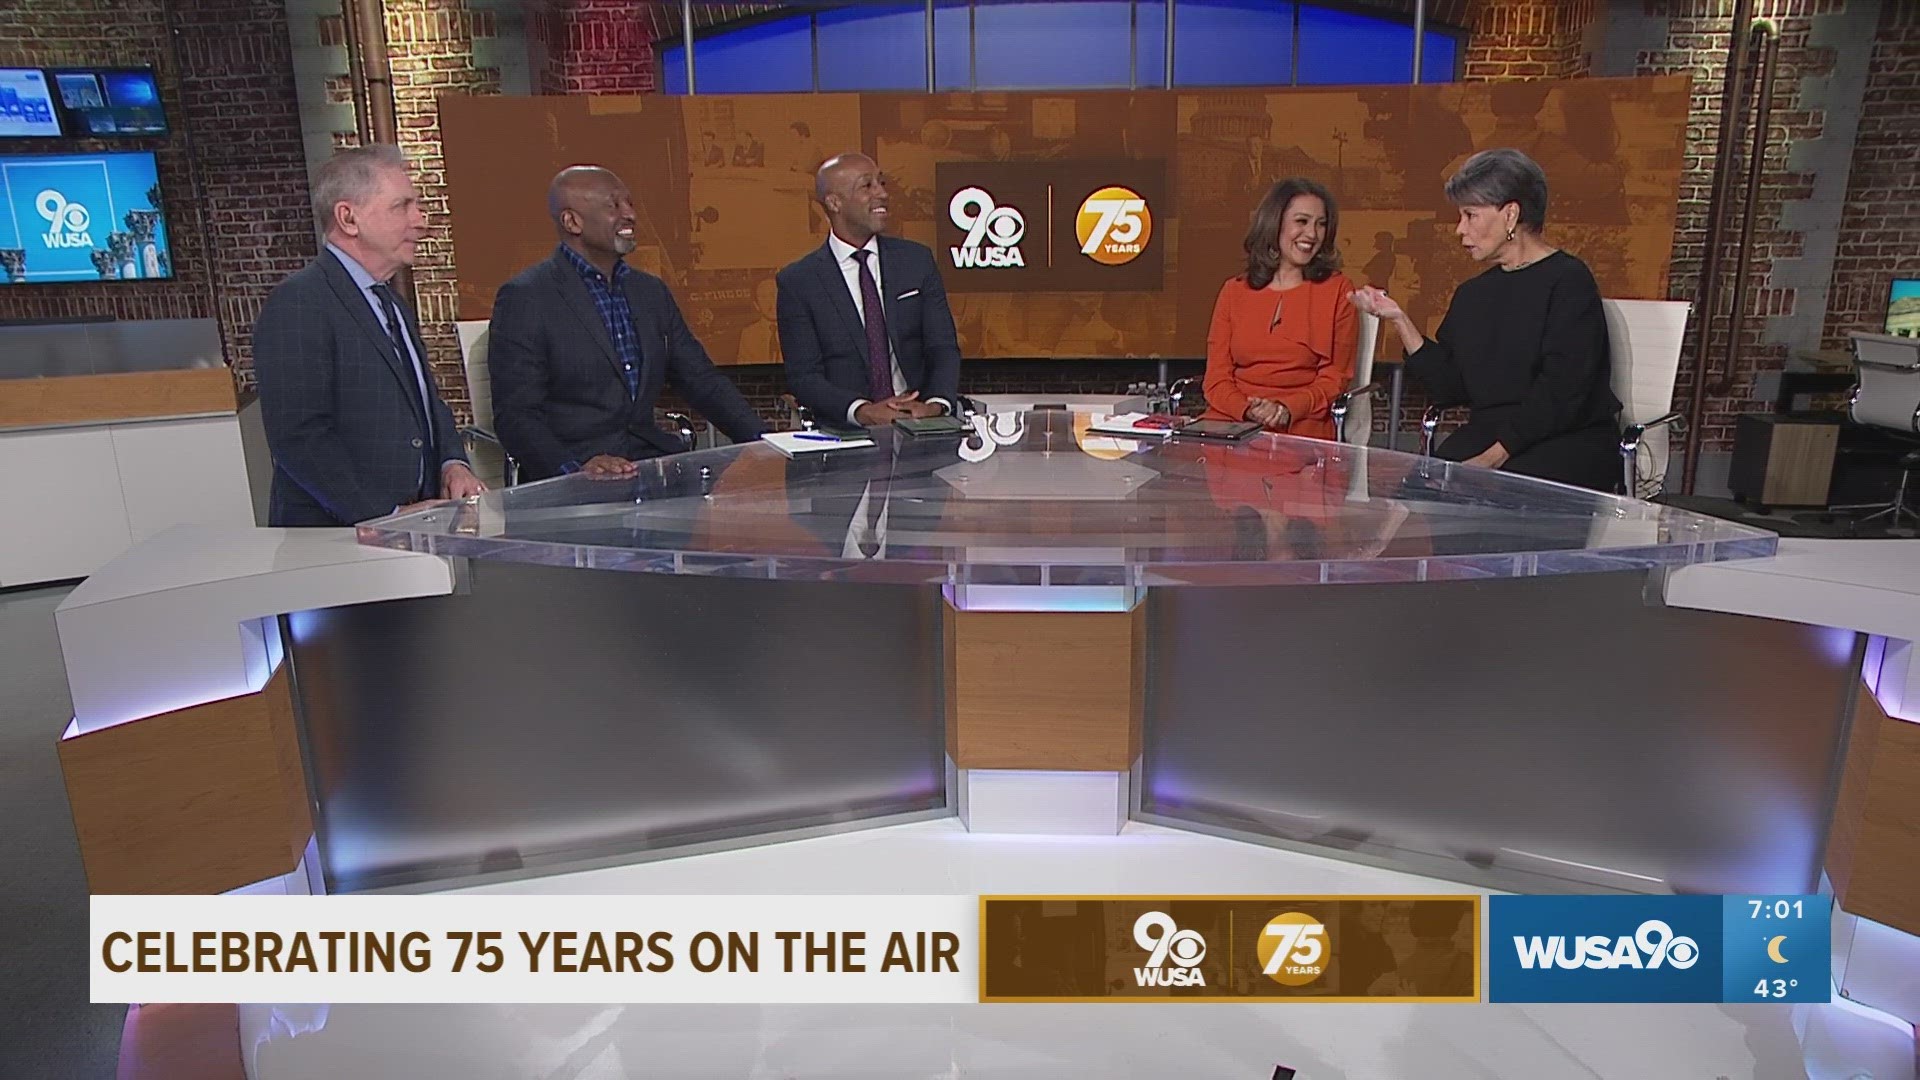 DC News legends Maureen Bunyan and Derek McGinty join us to look back at 75 years of serving the DMV.